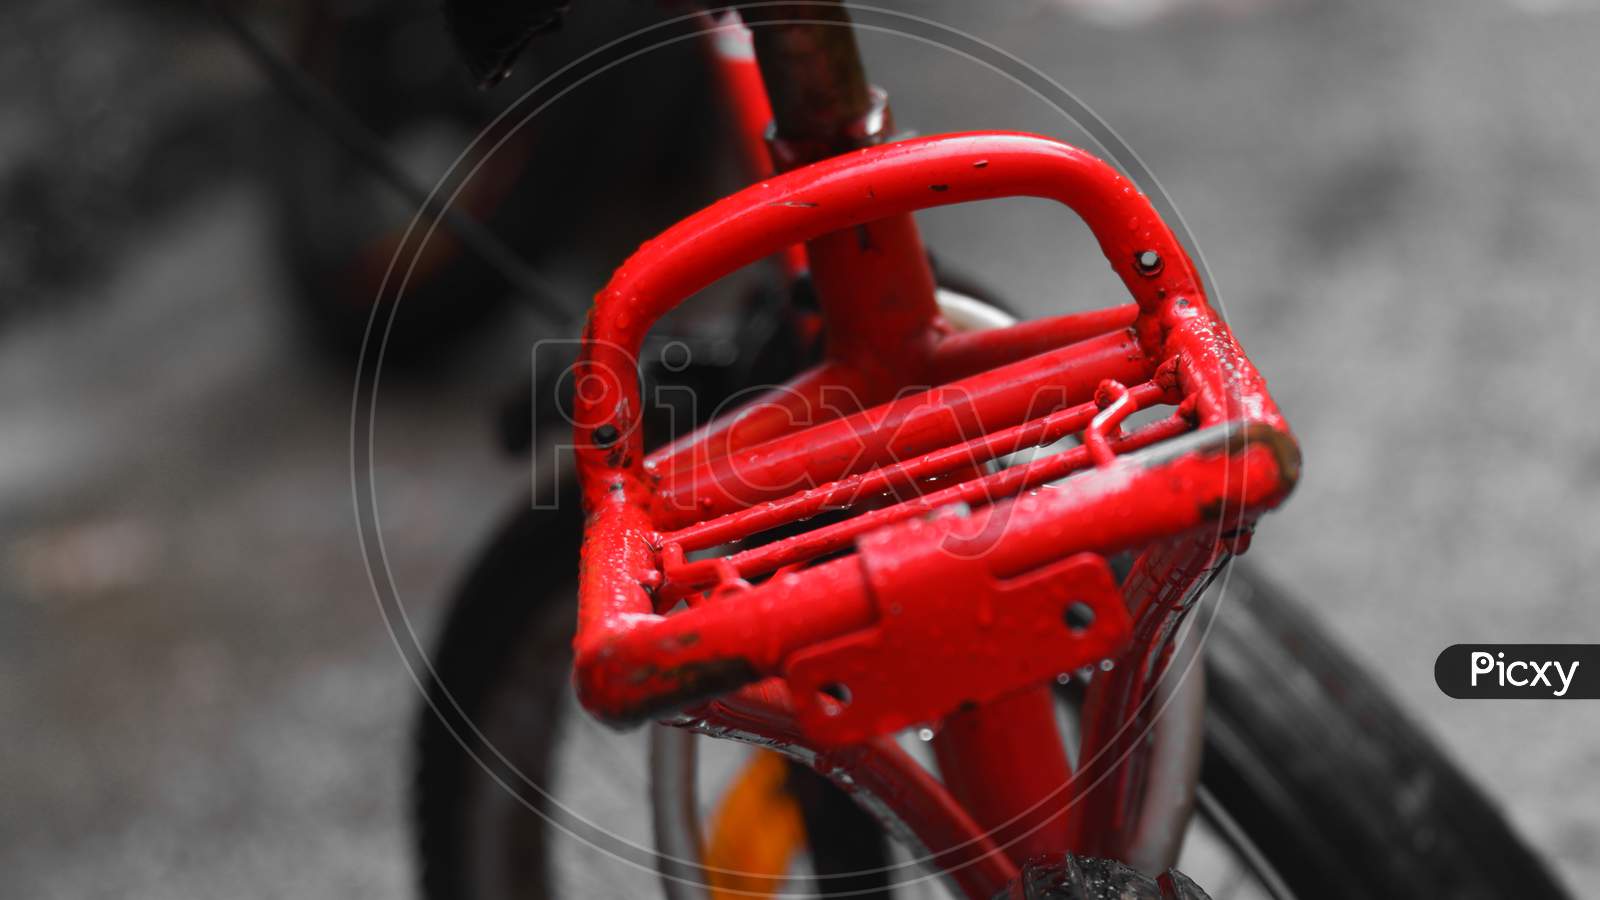 Isolated Close Up Image Of Red Carrier Of A Bicycle.